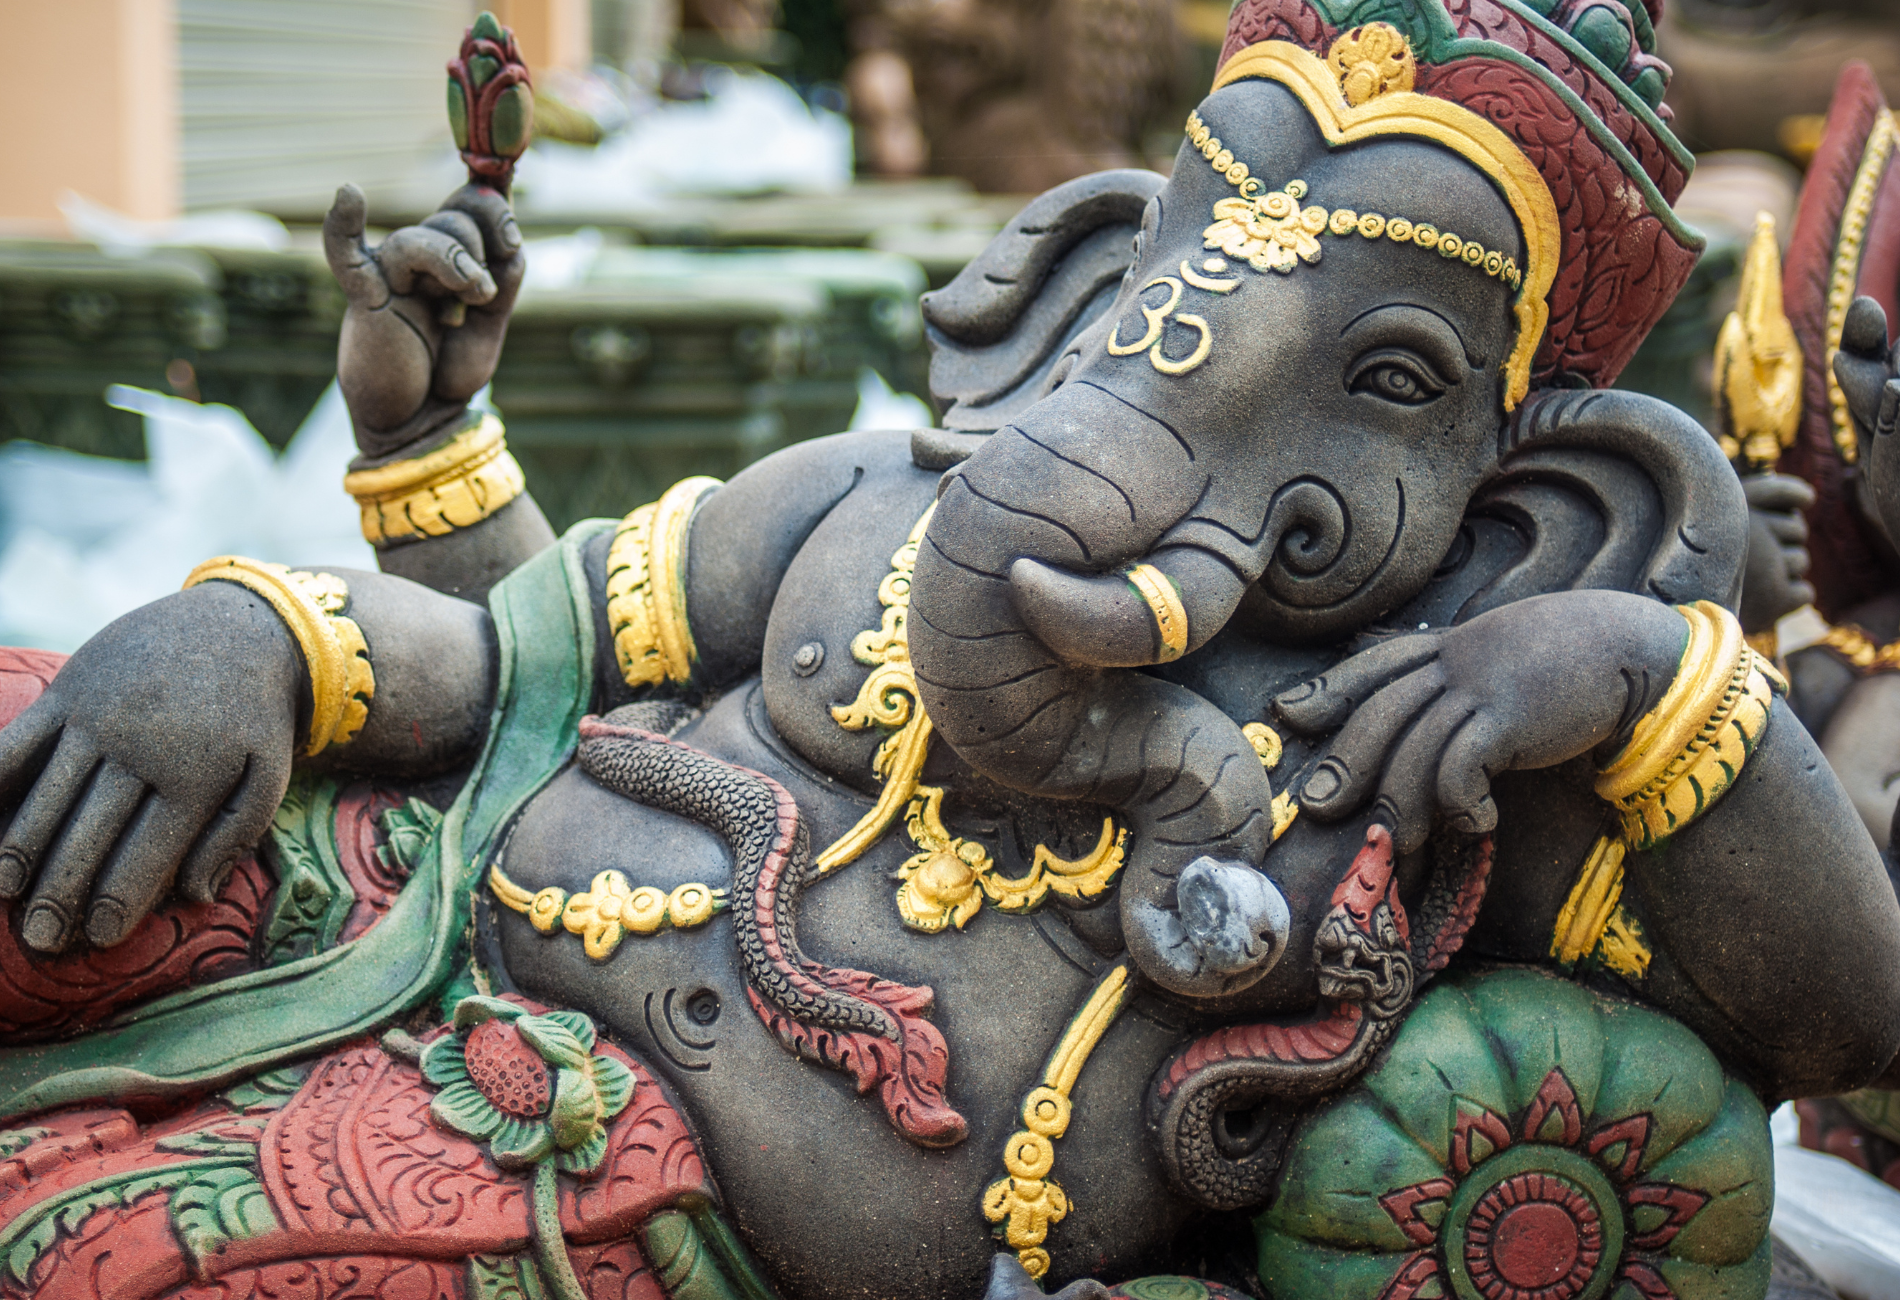 51 Ganesh Wallpaper Stock Video Footage - 4K and HD Video Clips |  Shutterstock